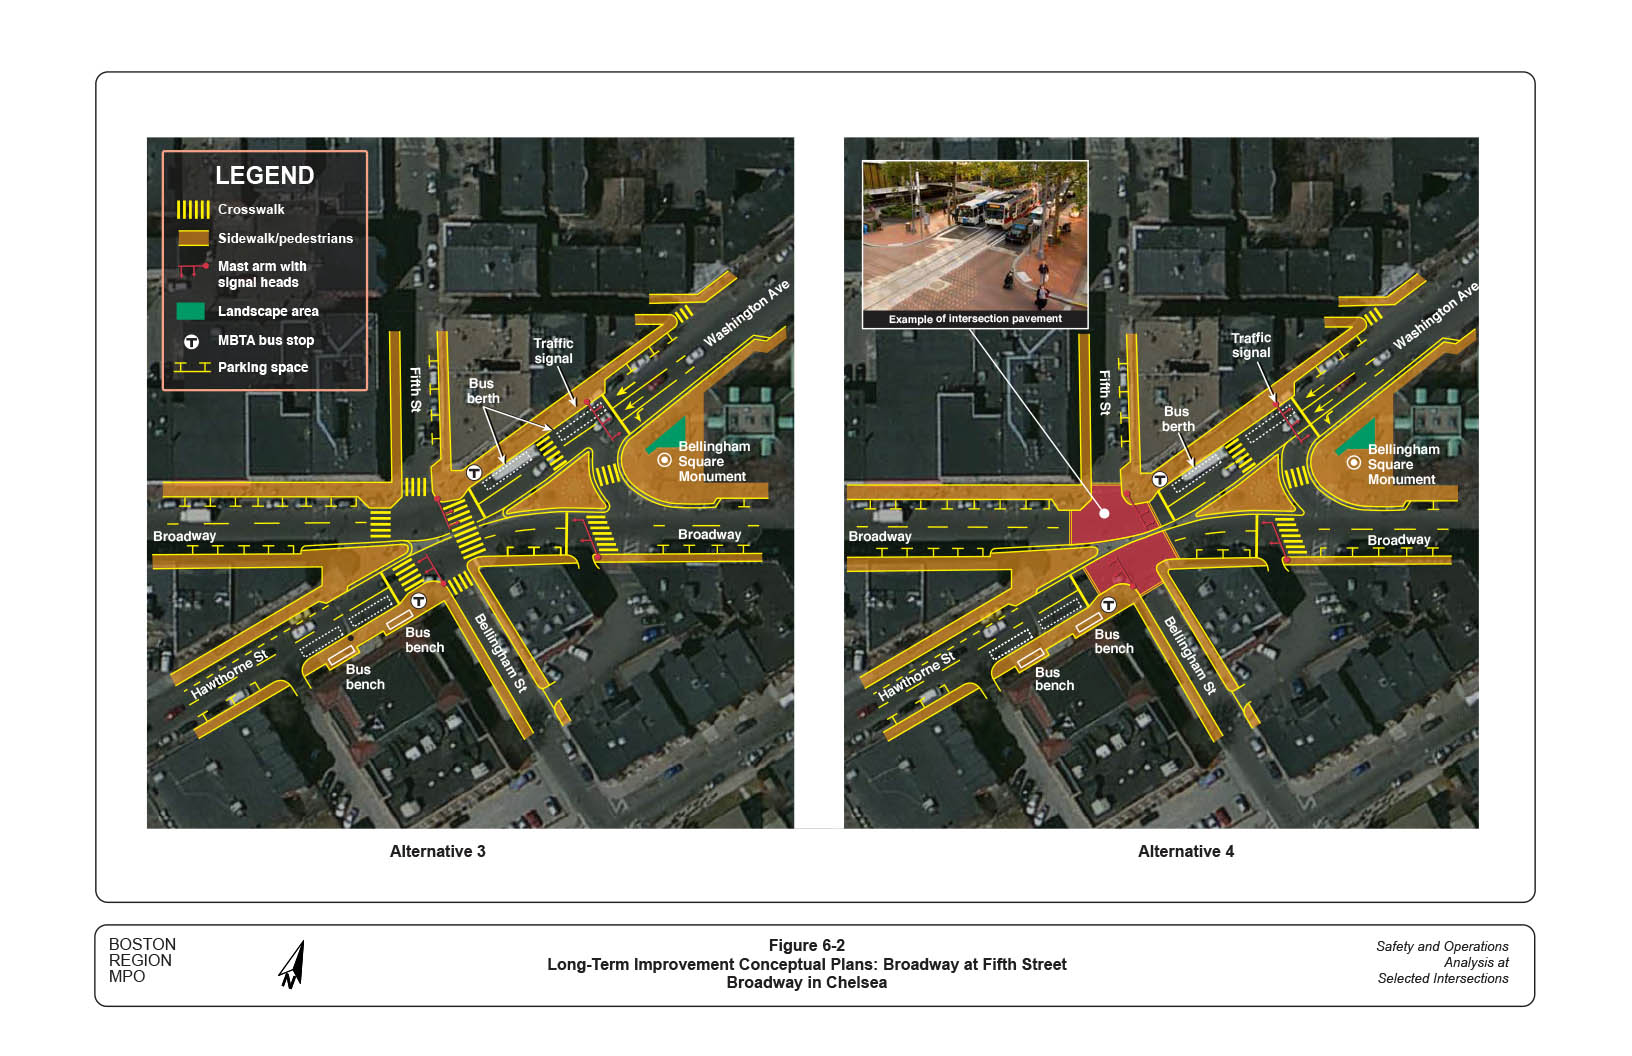 Figure 6-2 — Long-Term Improvement Conceptual Plans: Broadway at Fifth Street
Two separate maps, aerial views of study area with computer-drawn superimposed street and traffic maps, showing improvements under Alternatives 3 and 4, and indicating: crosswalk, mast arm with signal heads, sidewalk/pedestrians, landscape area, MBTA bus stop, and parking space.
